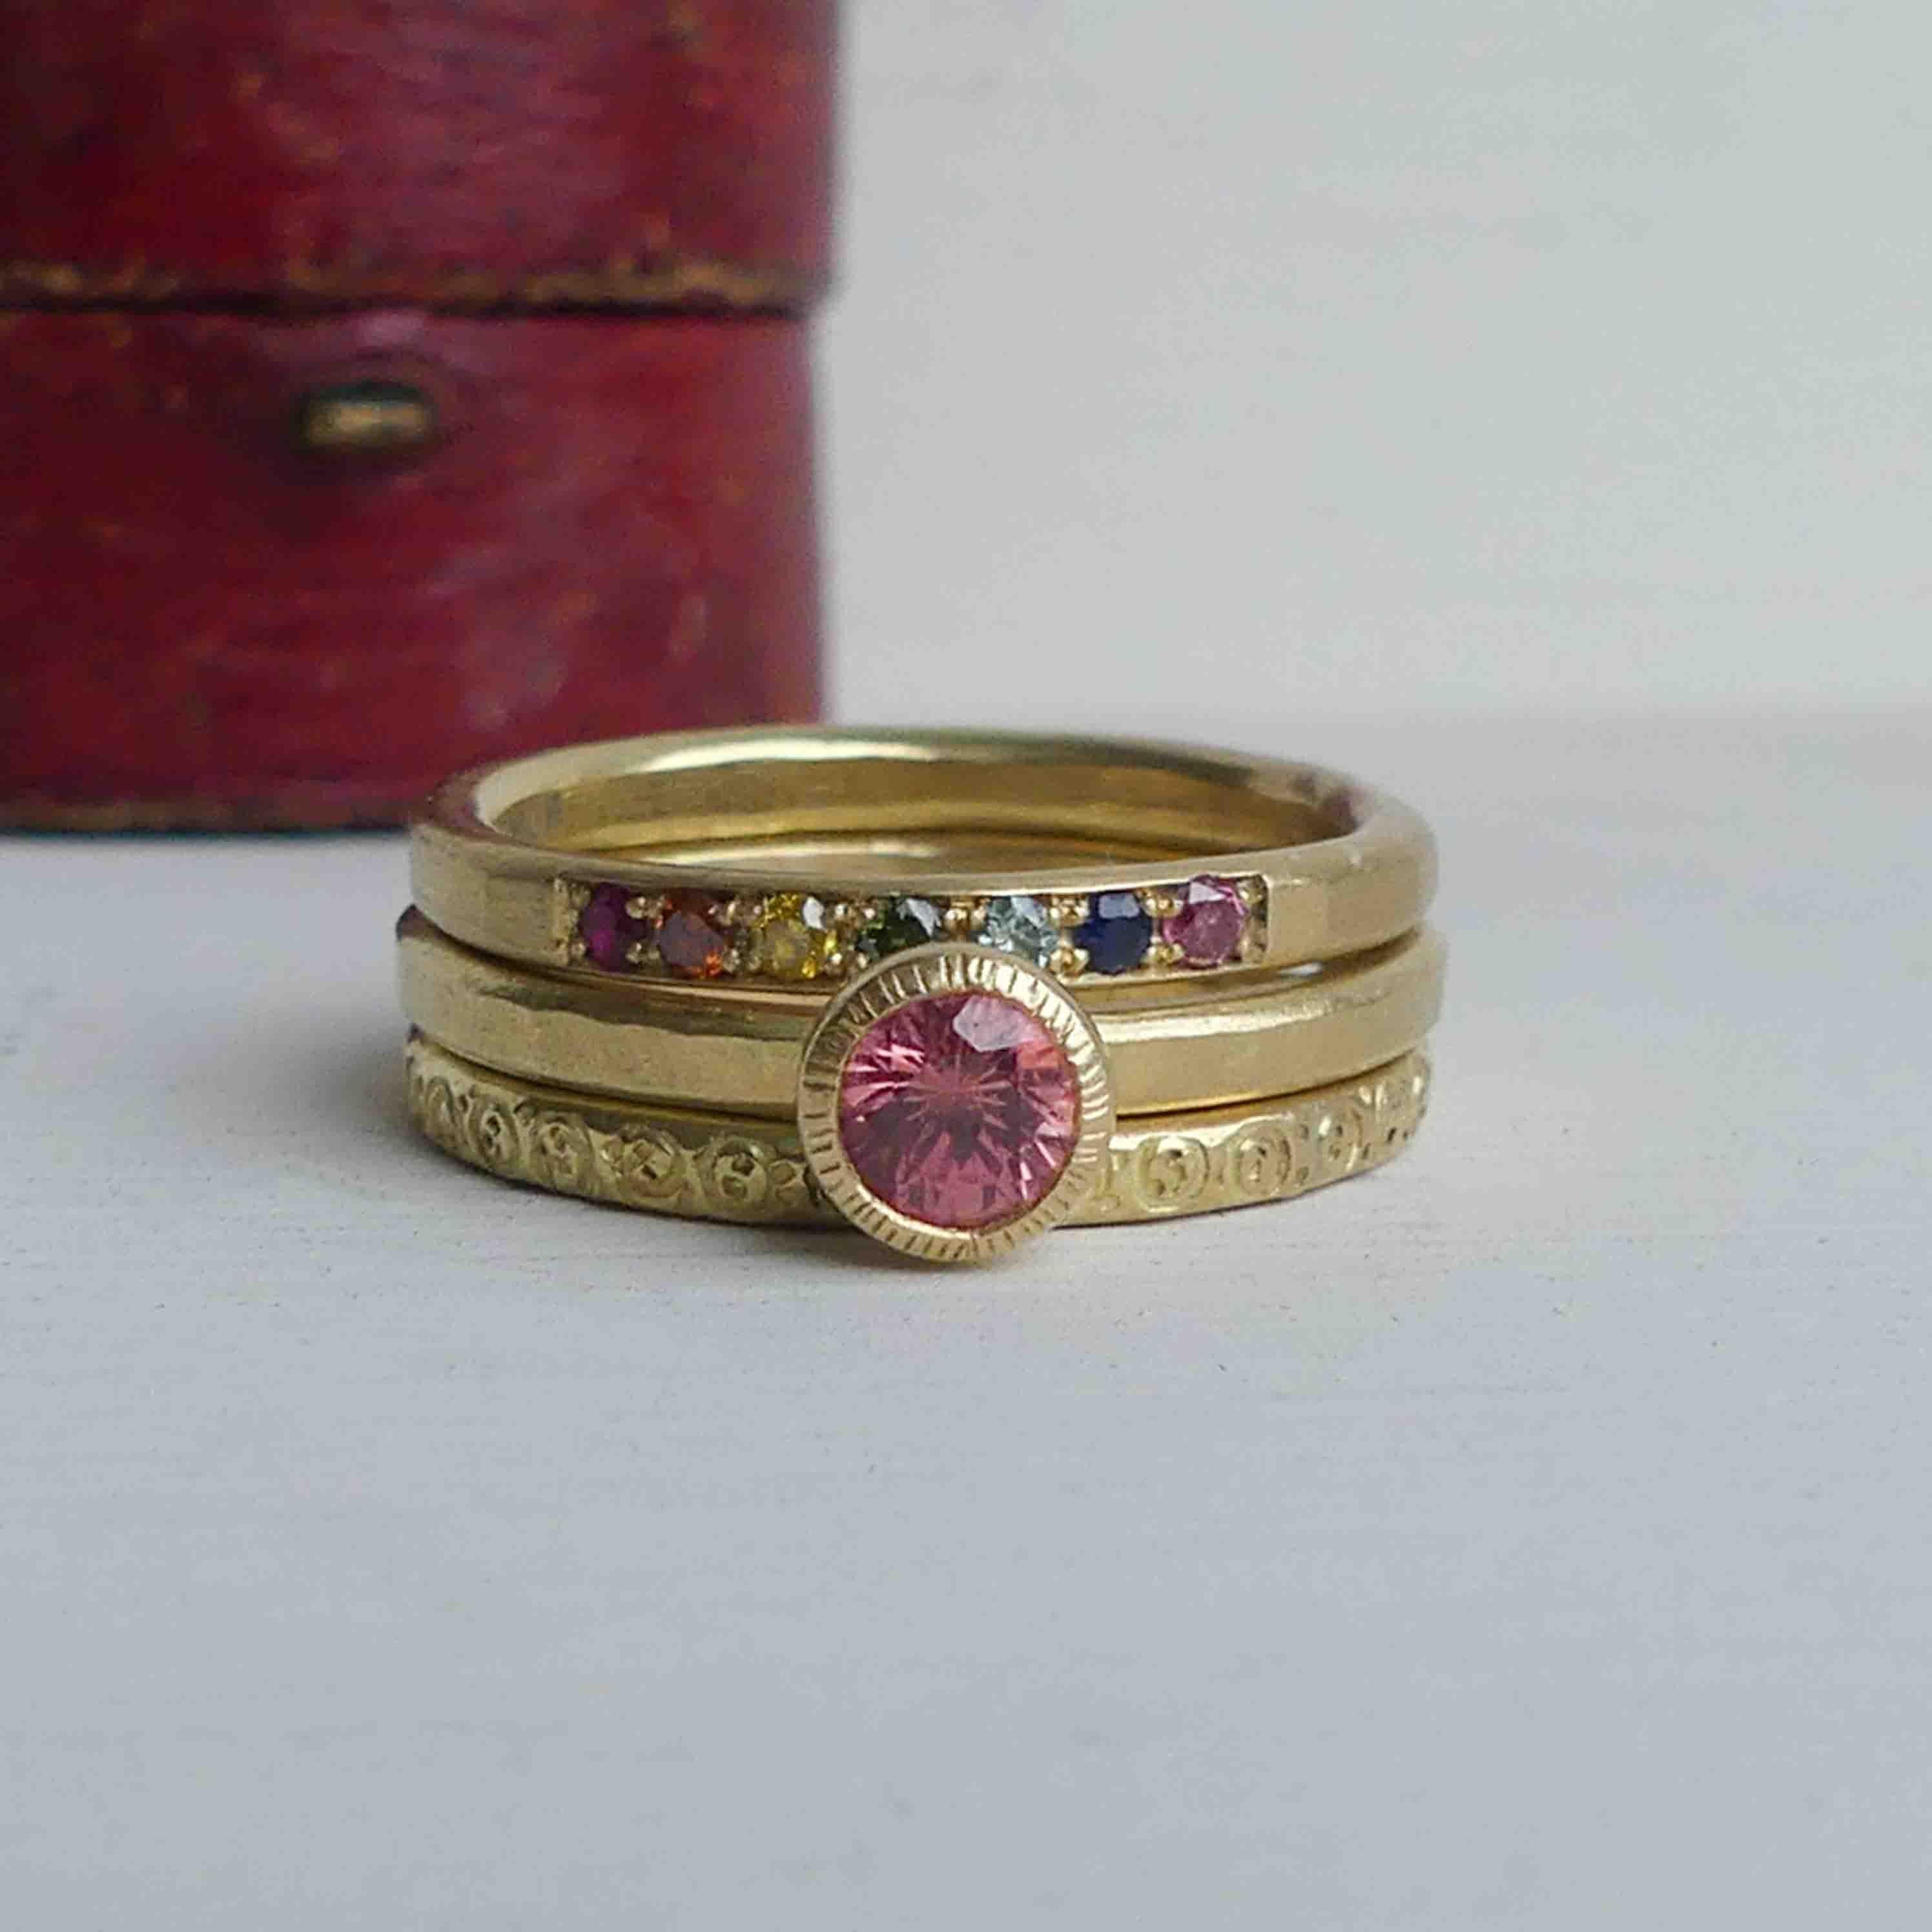 The Tigerlily padparadsha ethical ring is handmade with 18ct Fairmined gold and an ethically sourced padparadsha sapphire from Malawi.

Padparadsha sapphires have a rare beauty with their hues of pink and orange.  They are, among the rarest